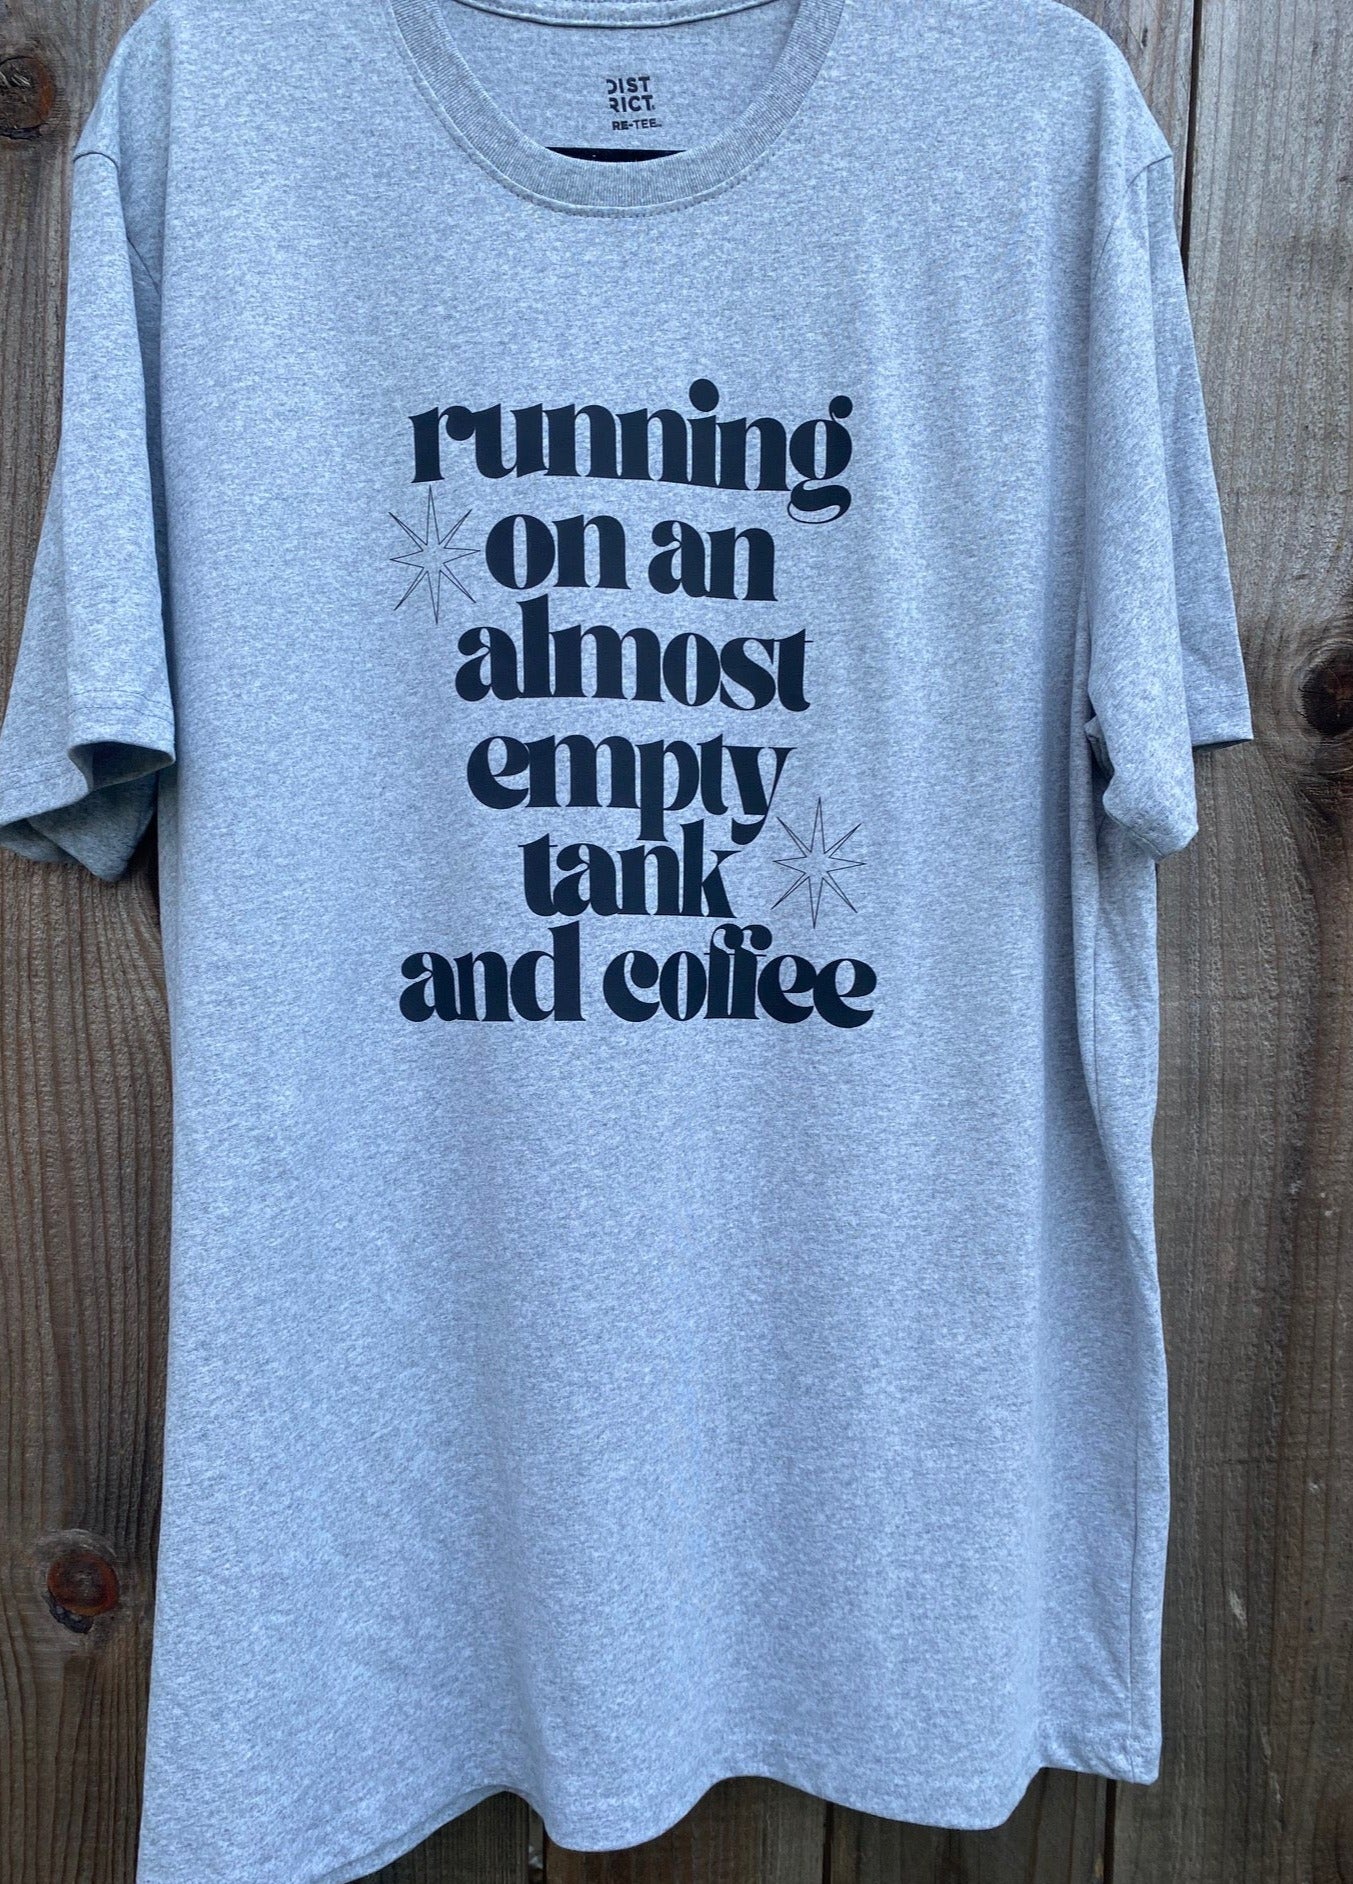 Gray t-shirt with "running on an almost empty tank and coffee" printed in black on the front with 2 black outlined star bursts